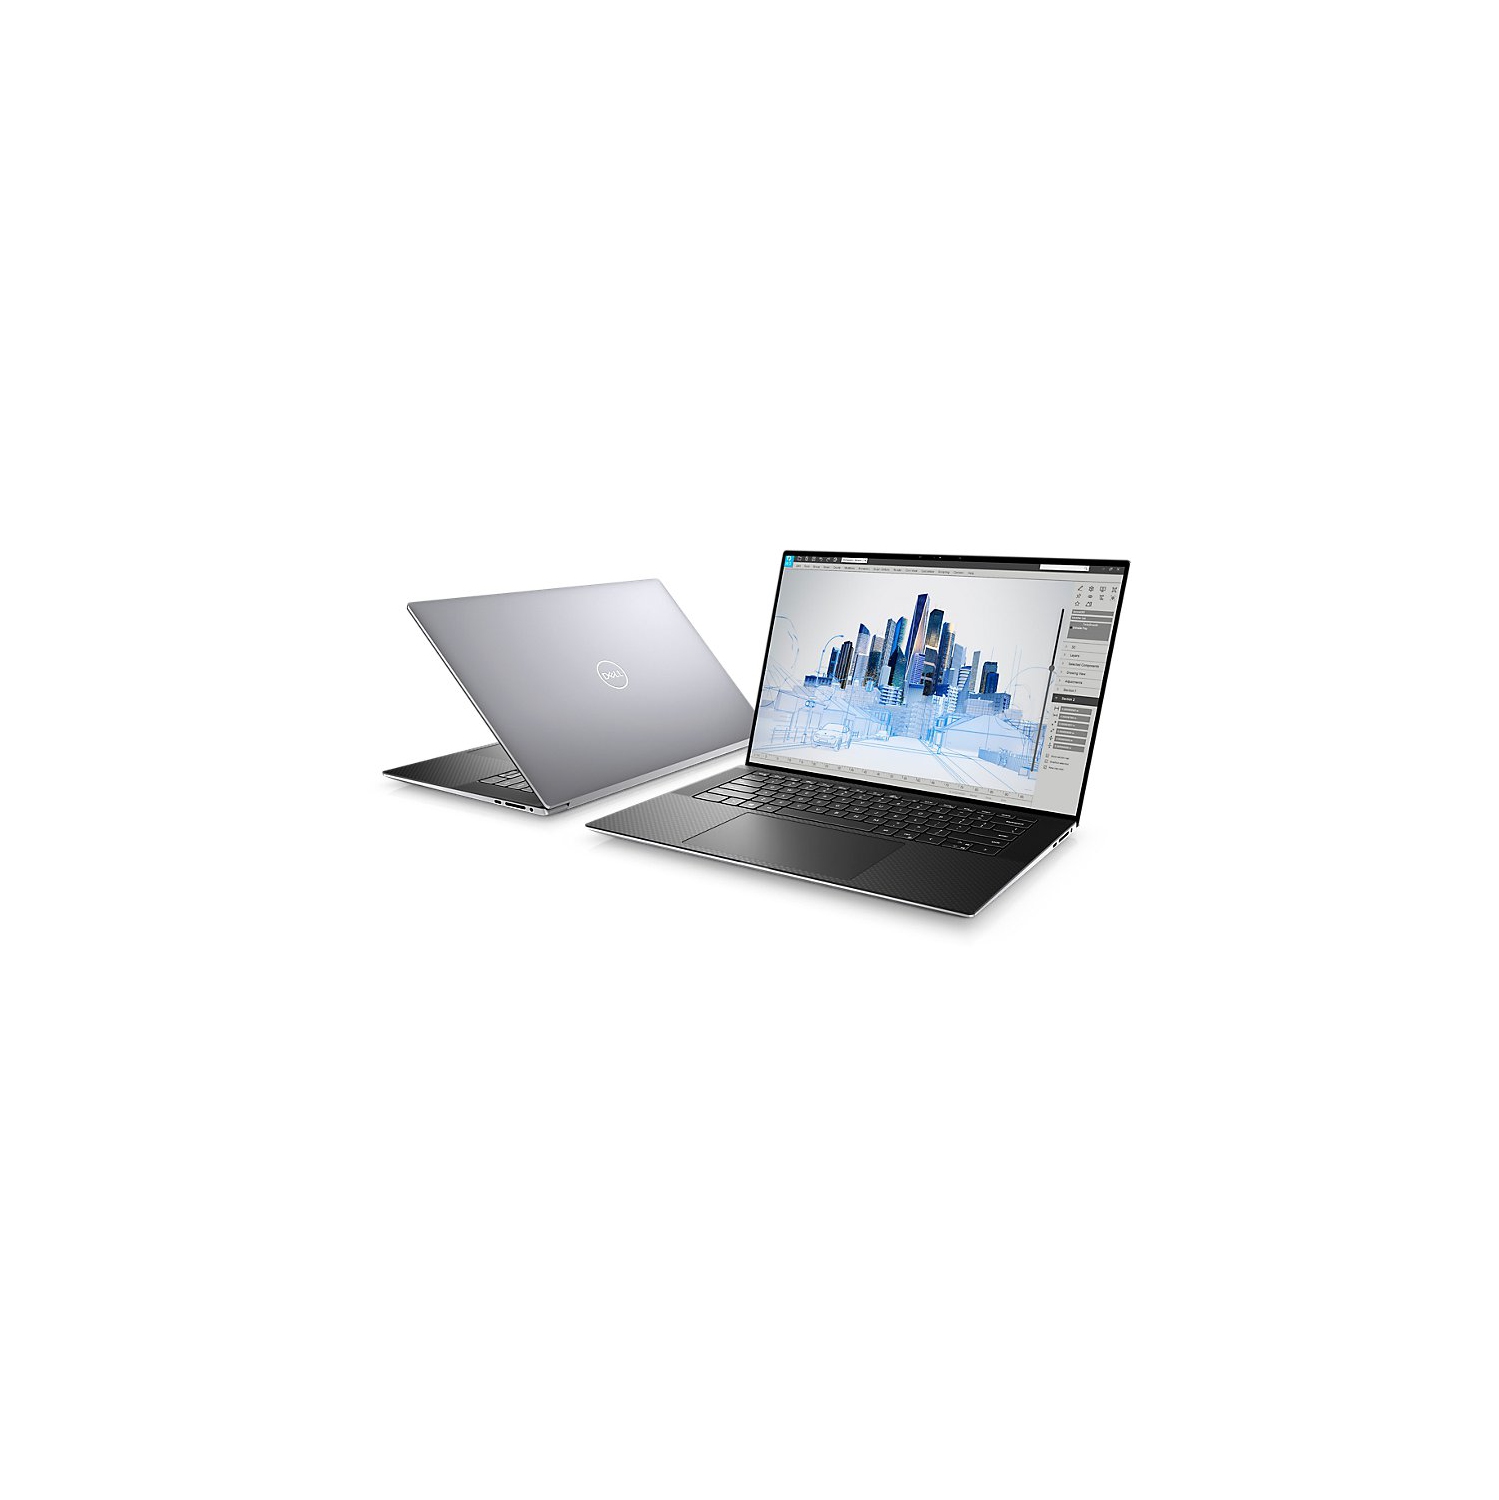 Dell Precision 5000 5560 Workstation Laptop (2021) | 15.6" 4K Touch | Core i7 - 1TB SSD - 32GB RAM - Nvidia T1200 | 8 Cores @ 4.8 GHz - 11th Gen CPU